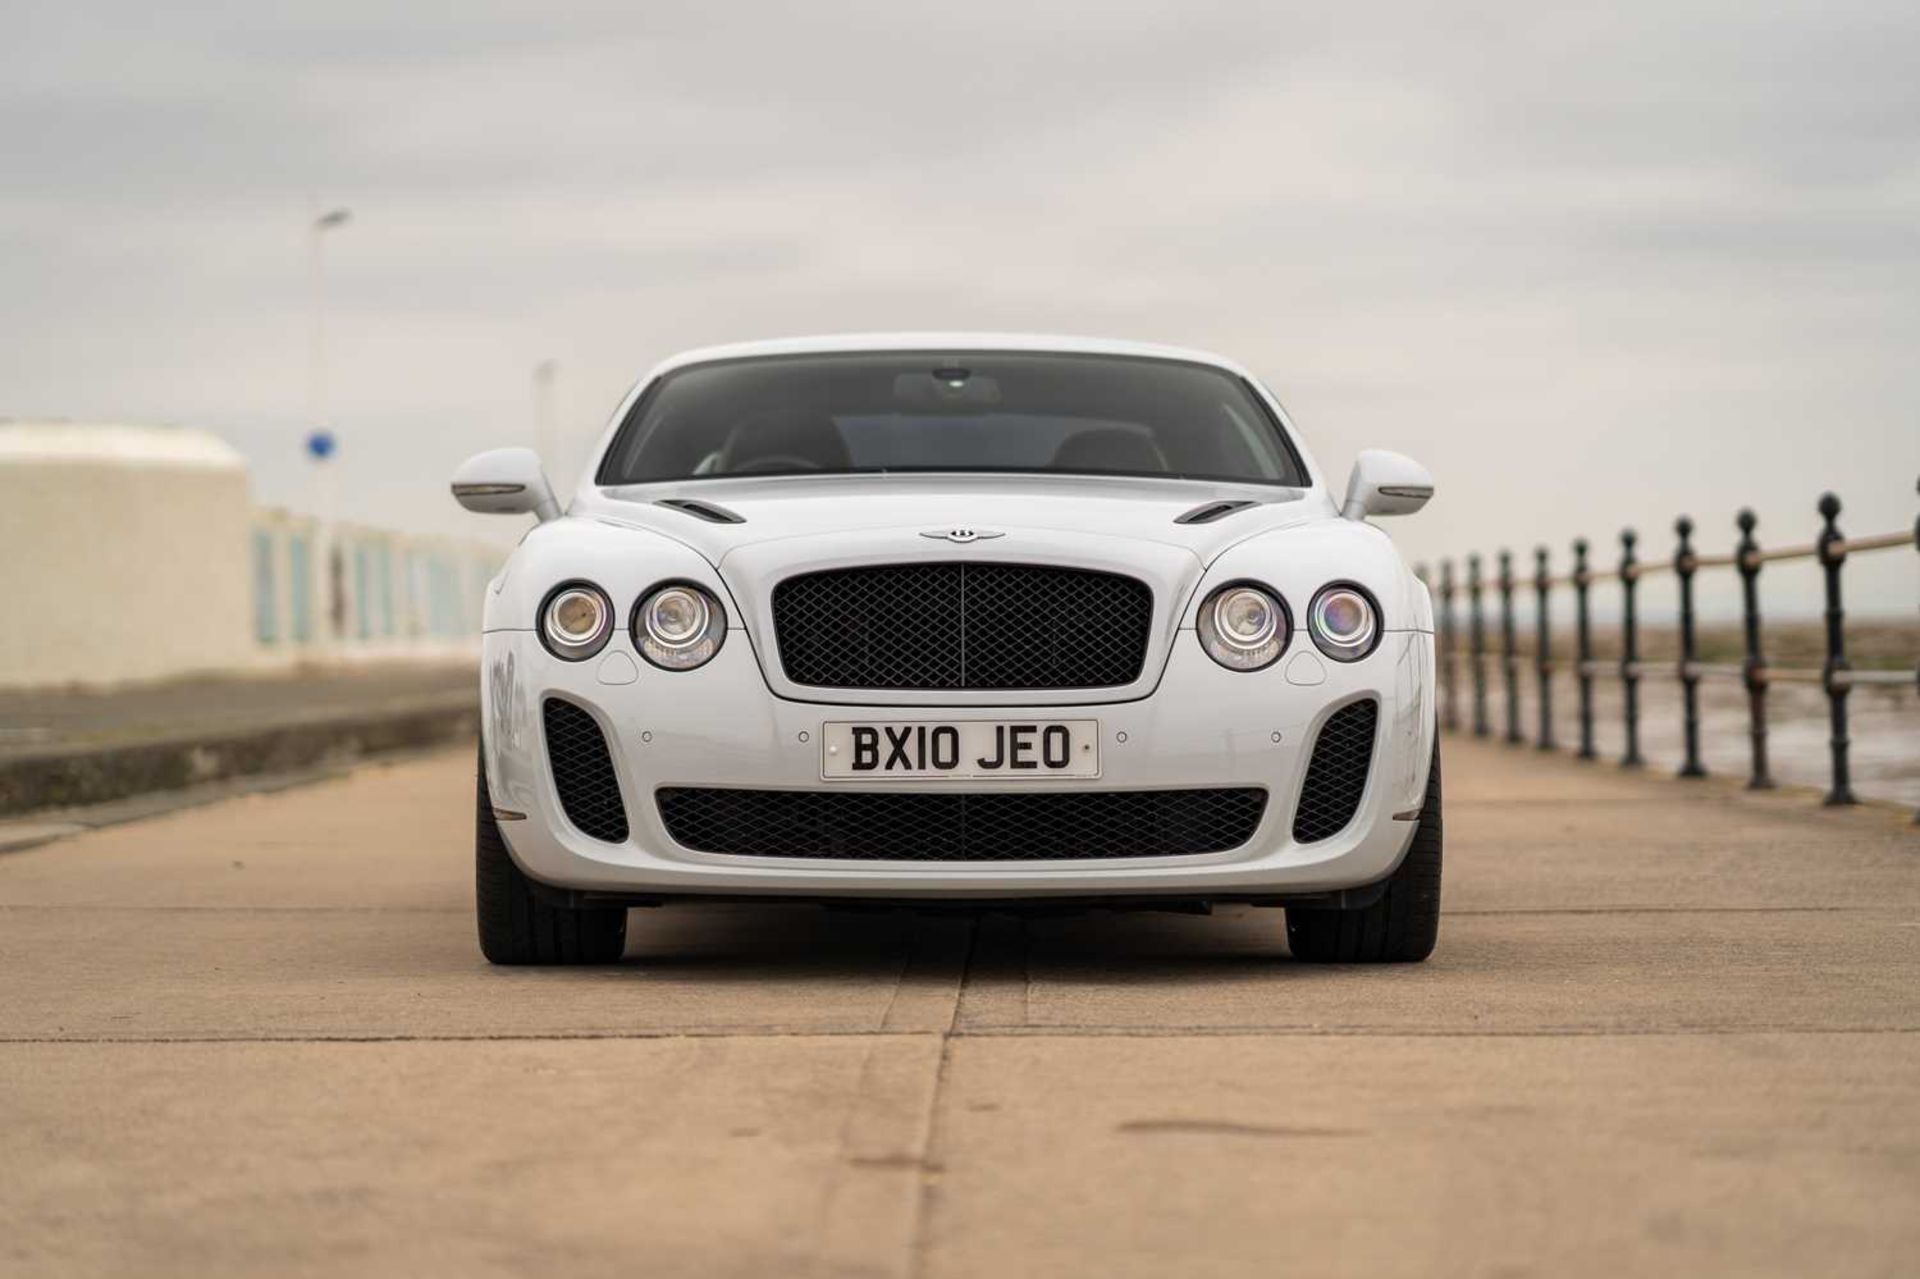 2010 Bentley Continental Supersports Only 33,000 miles with full Bentley service history - Image 2 of 52